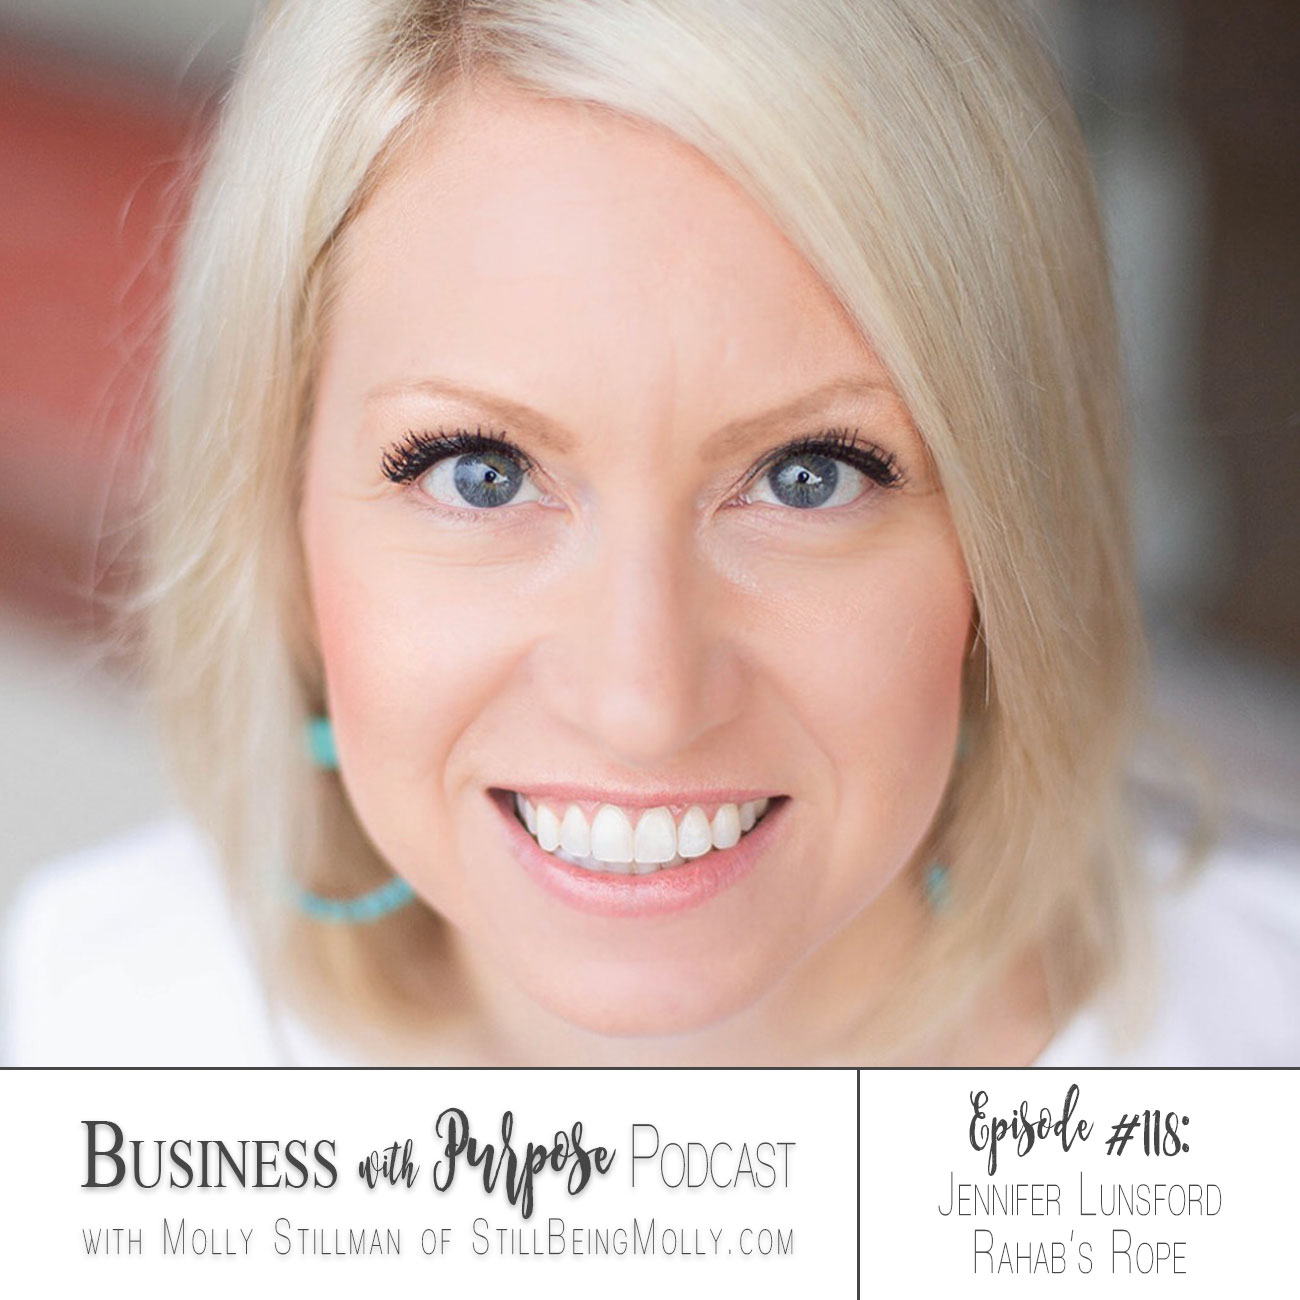 Business with Purpose Podcast EP 118: Jennifer Lunsford, Rahab's Rope